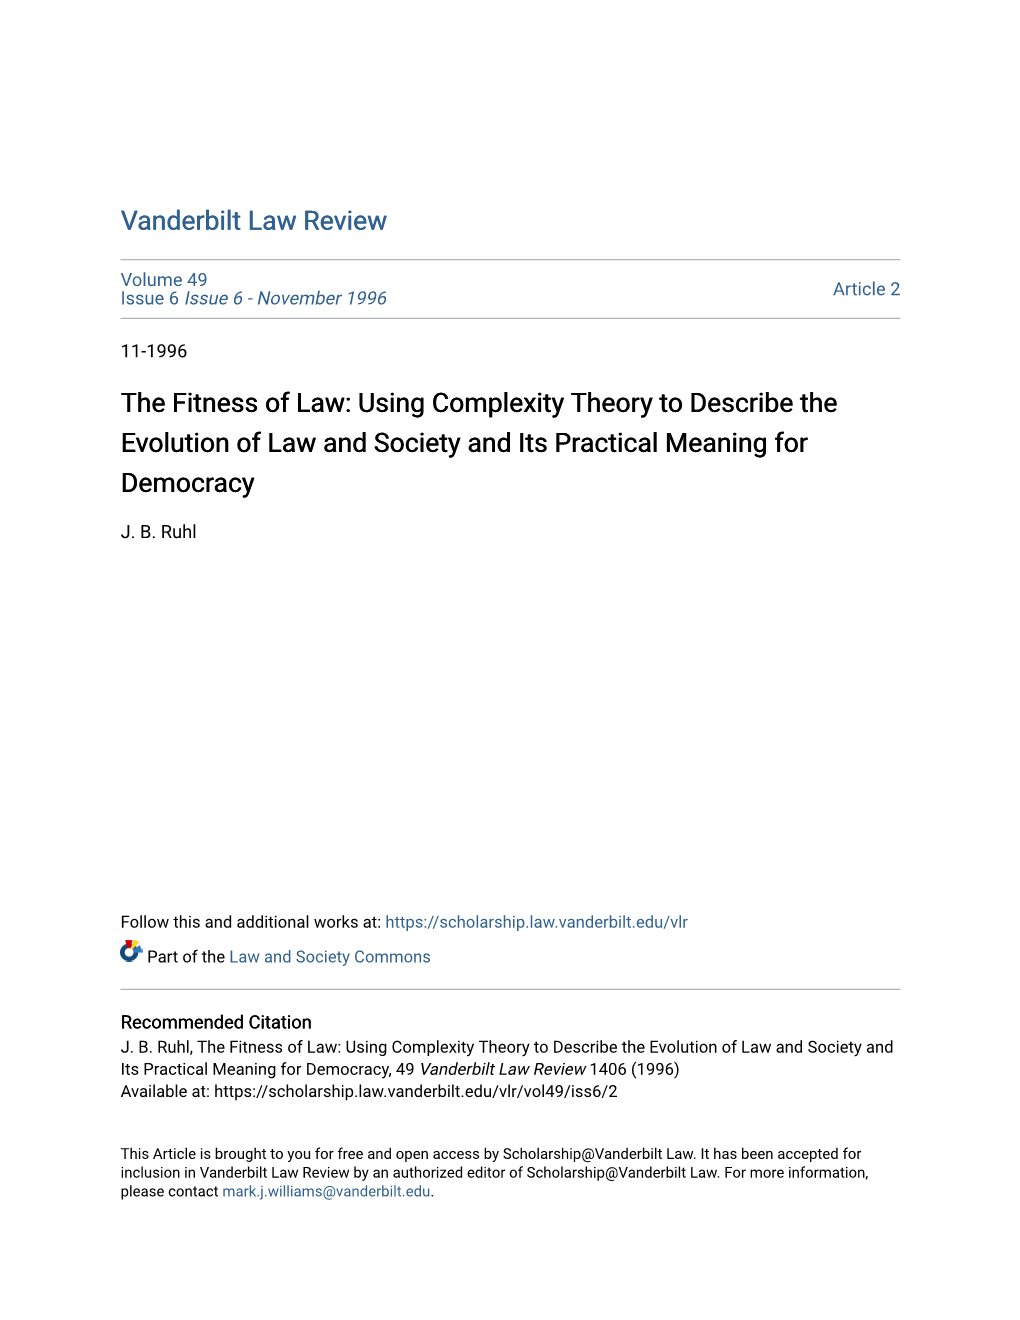 The Fitness of Law: Using Complexity Theory to Describe the Evolution of Law and Society and Its Practical Meaning for Democracy